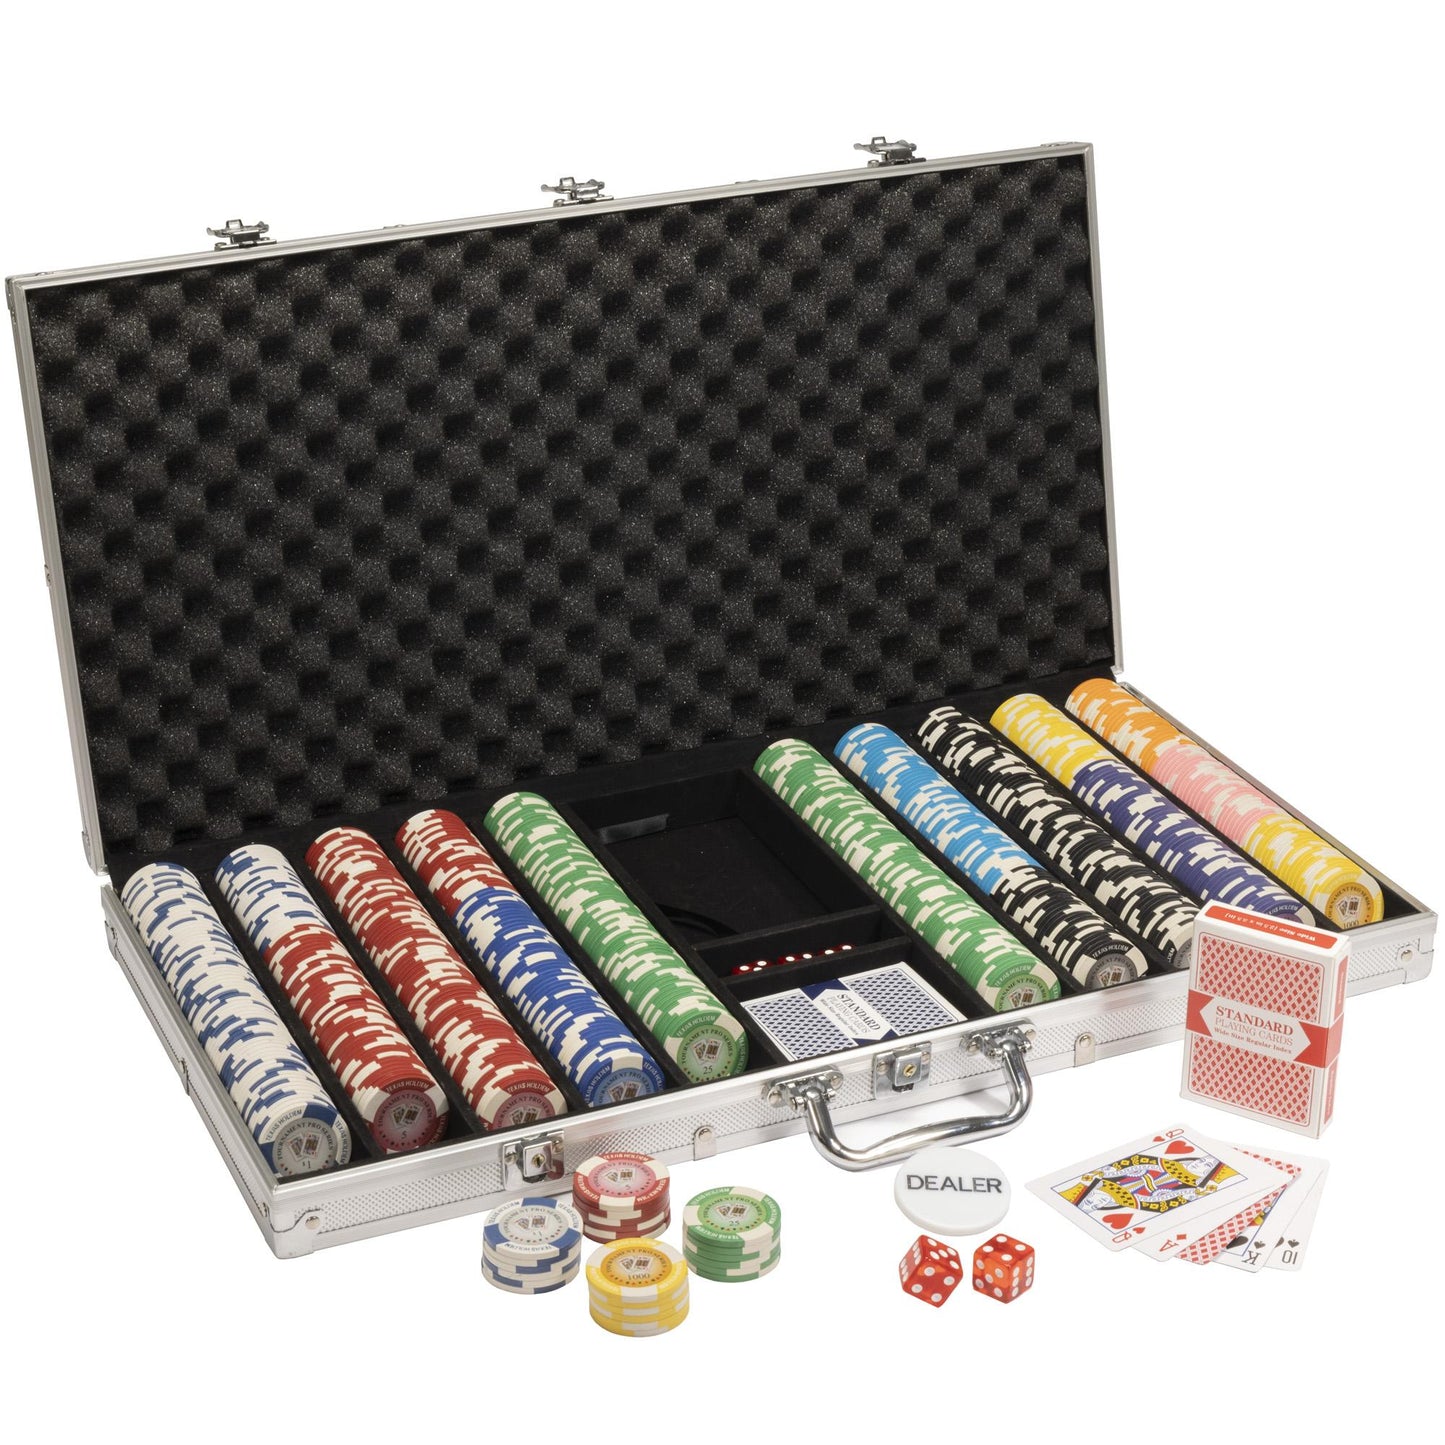 750 Tournament Pro Poker Chips with Aluminum Case